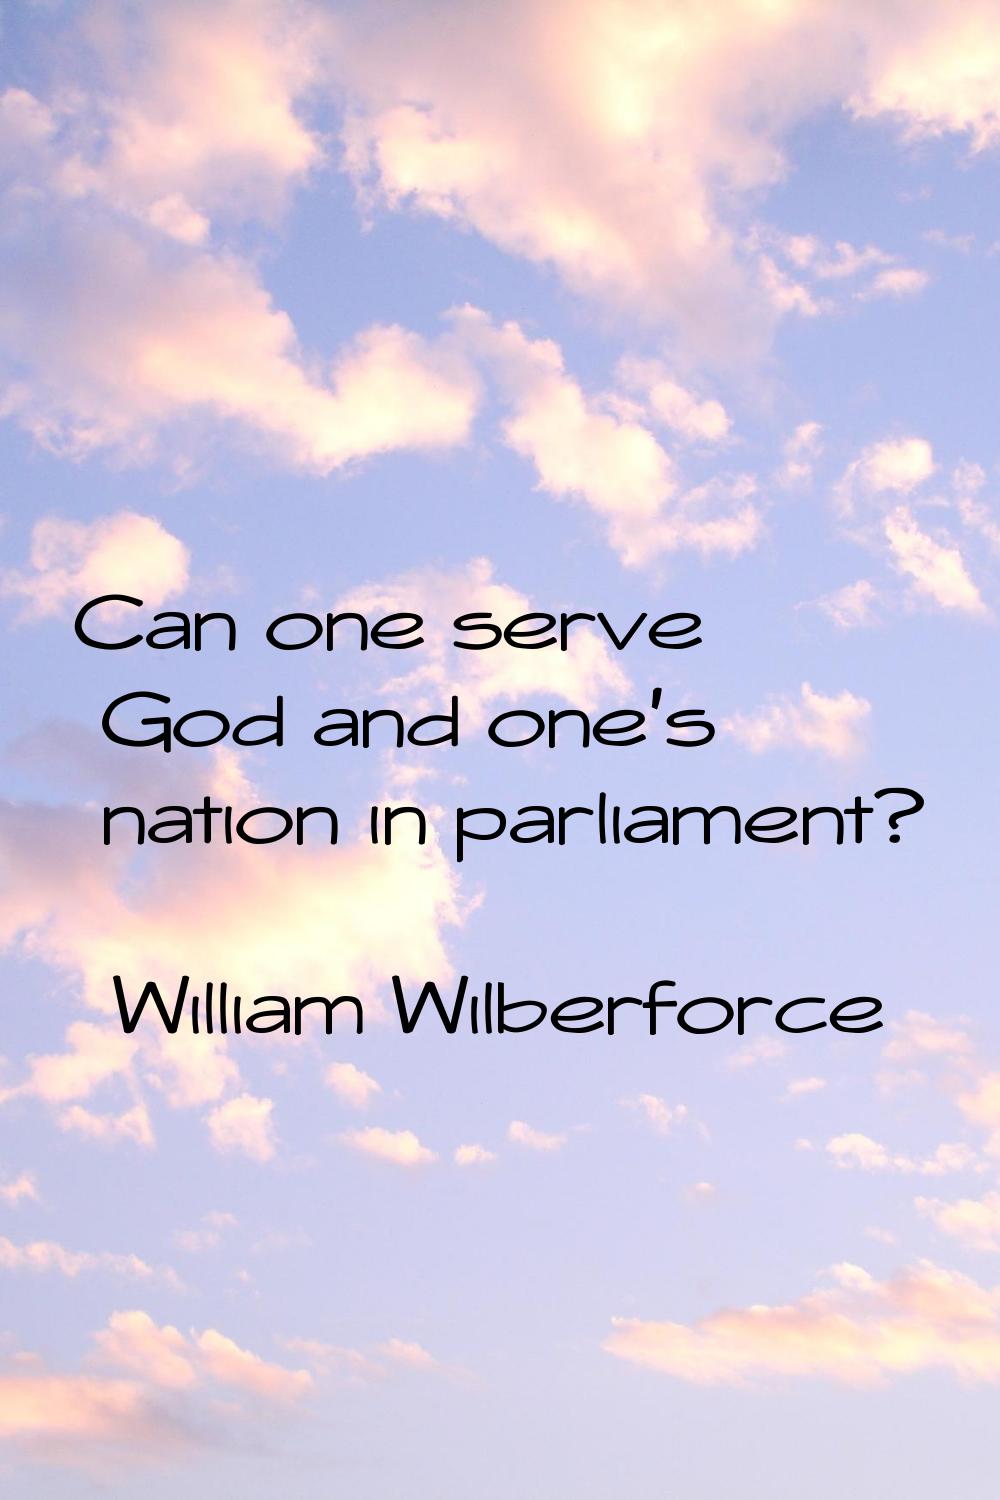 Can one serve God and one's nation in parliament?